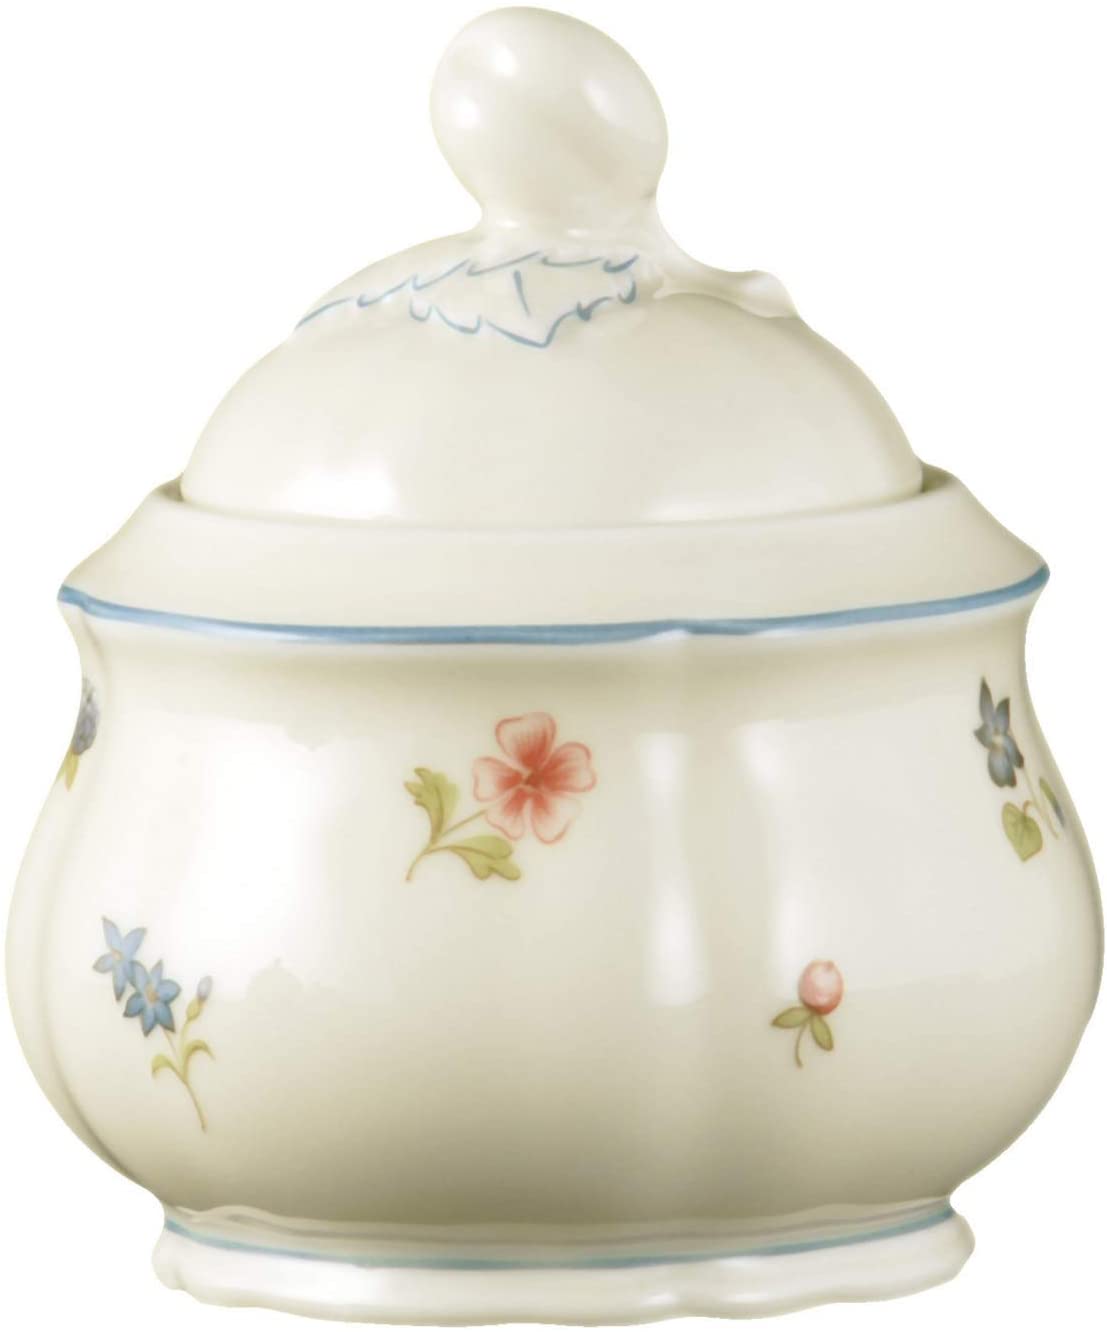 Seltmann Weiden Marie Luise 001.297944 Sugar Bowl for 6 People Scattered Flowers